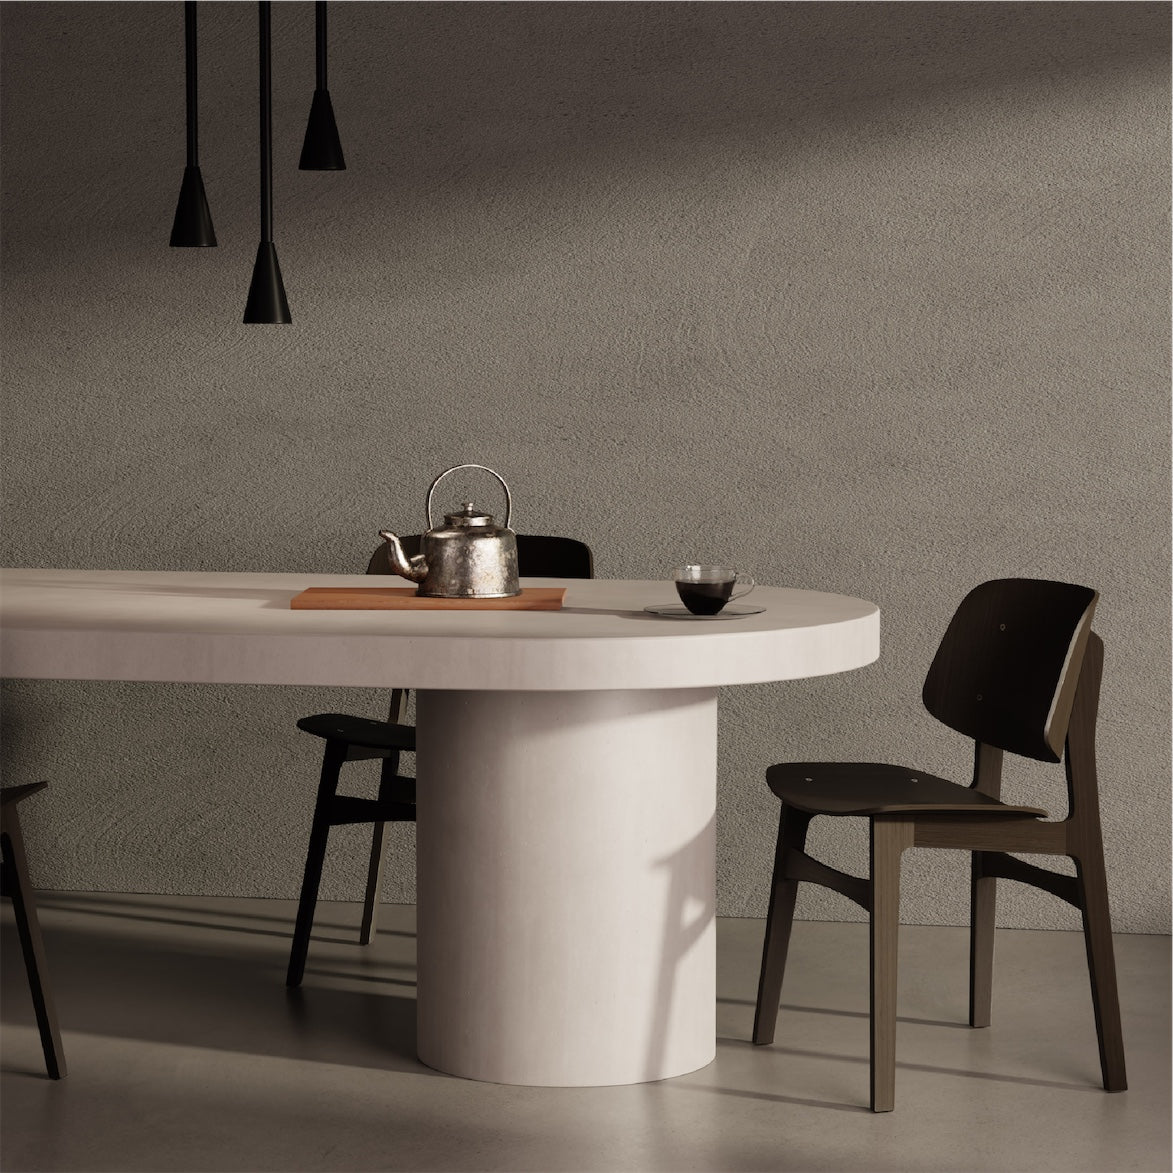 A Verona Concrete Dining Table sitting in front of a rendered wall. 